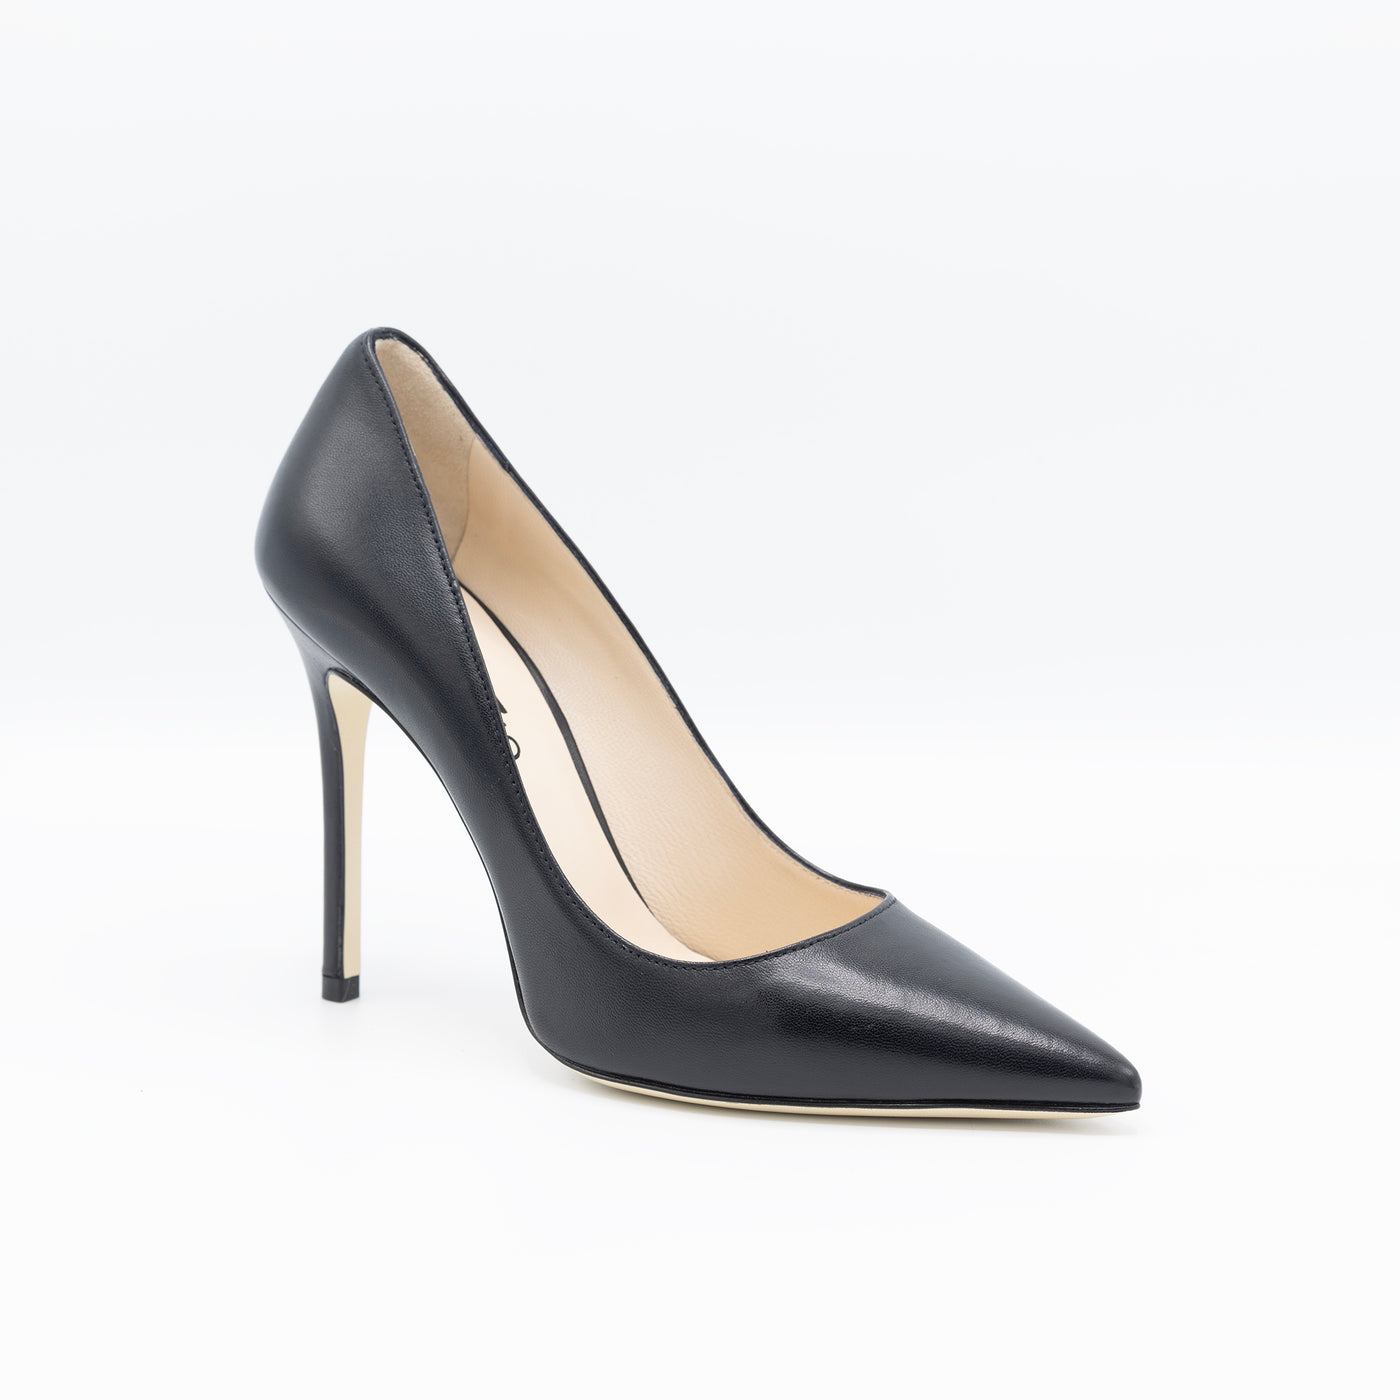 Pointy toe black leather pumps 